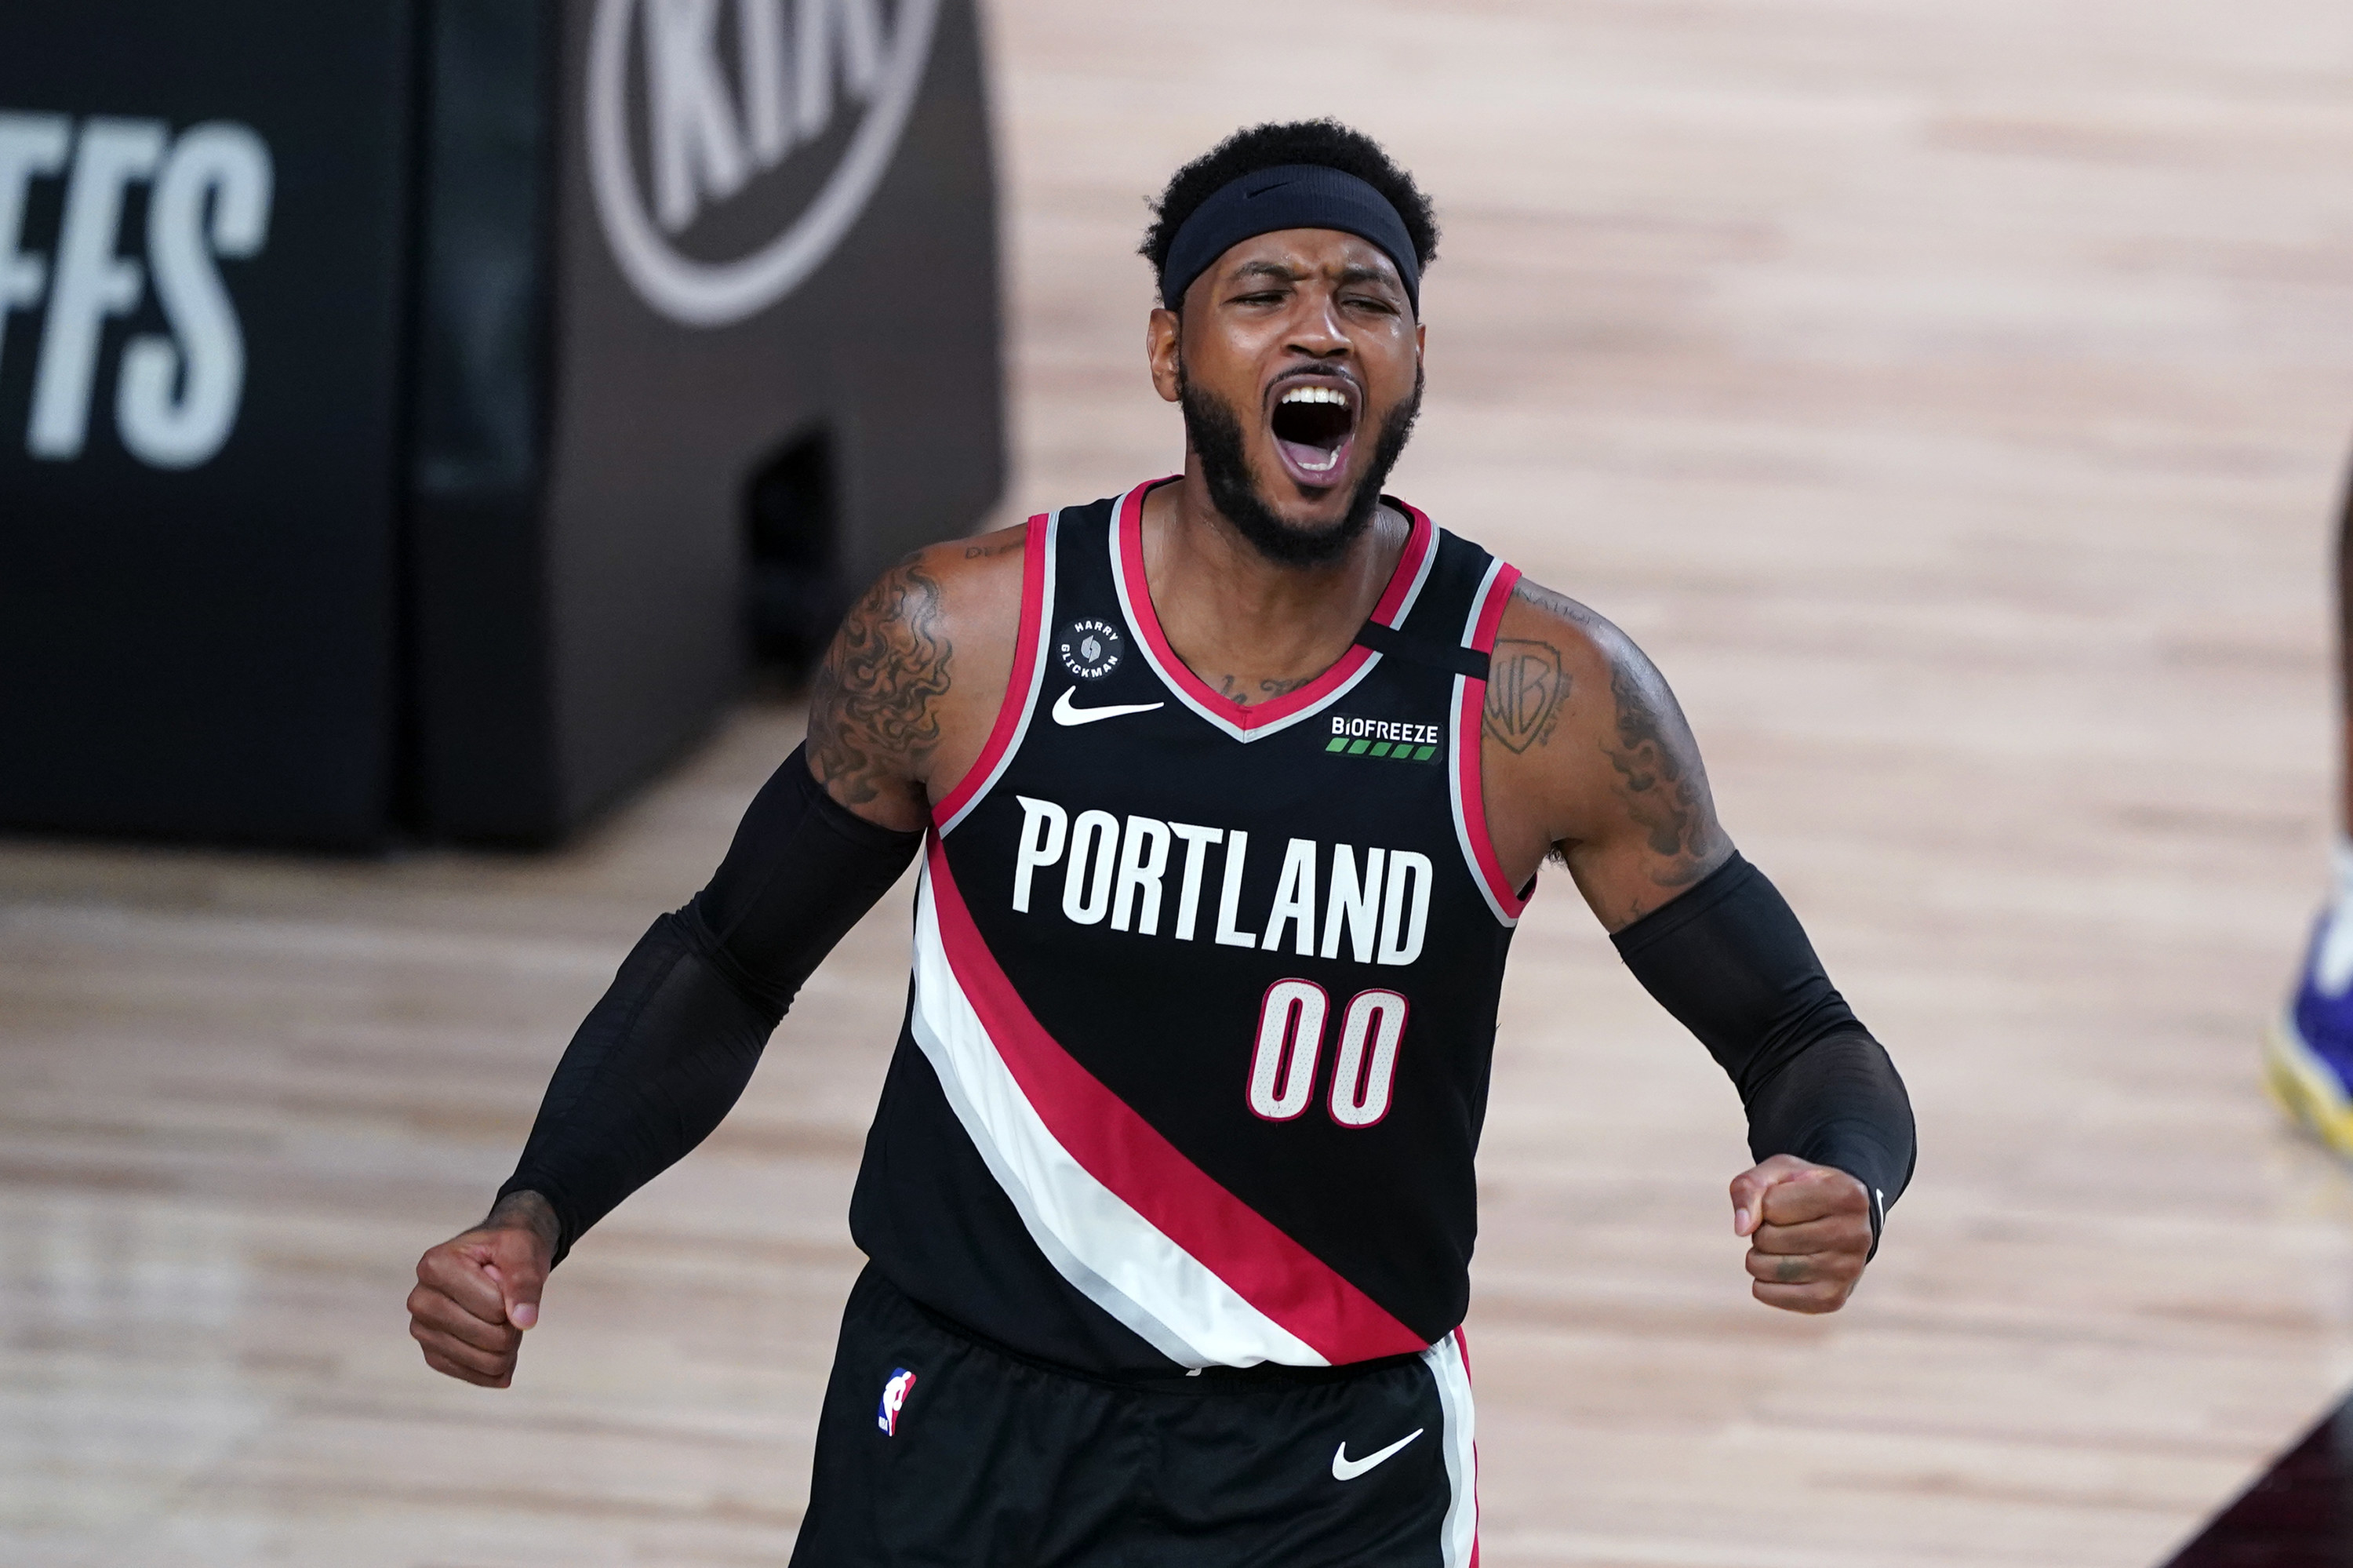 Black Portland jersey with a red and white sash going down the middle